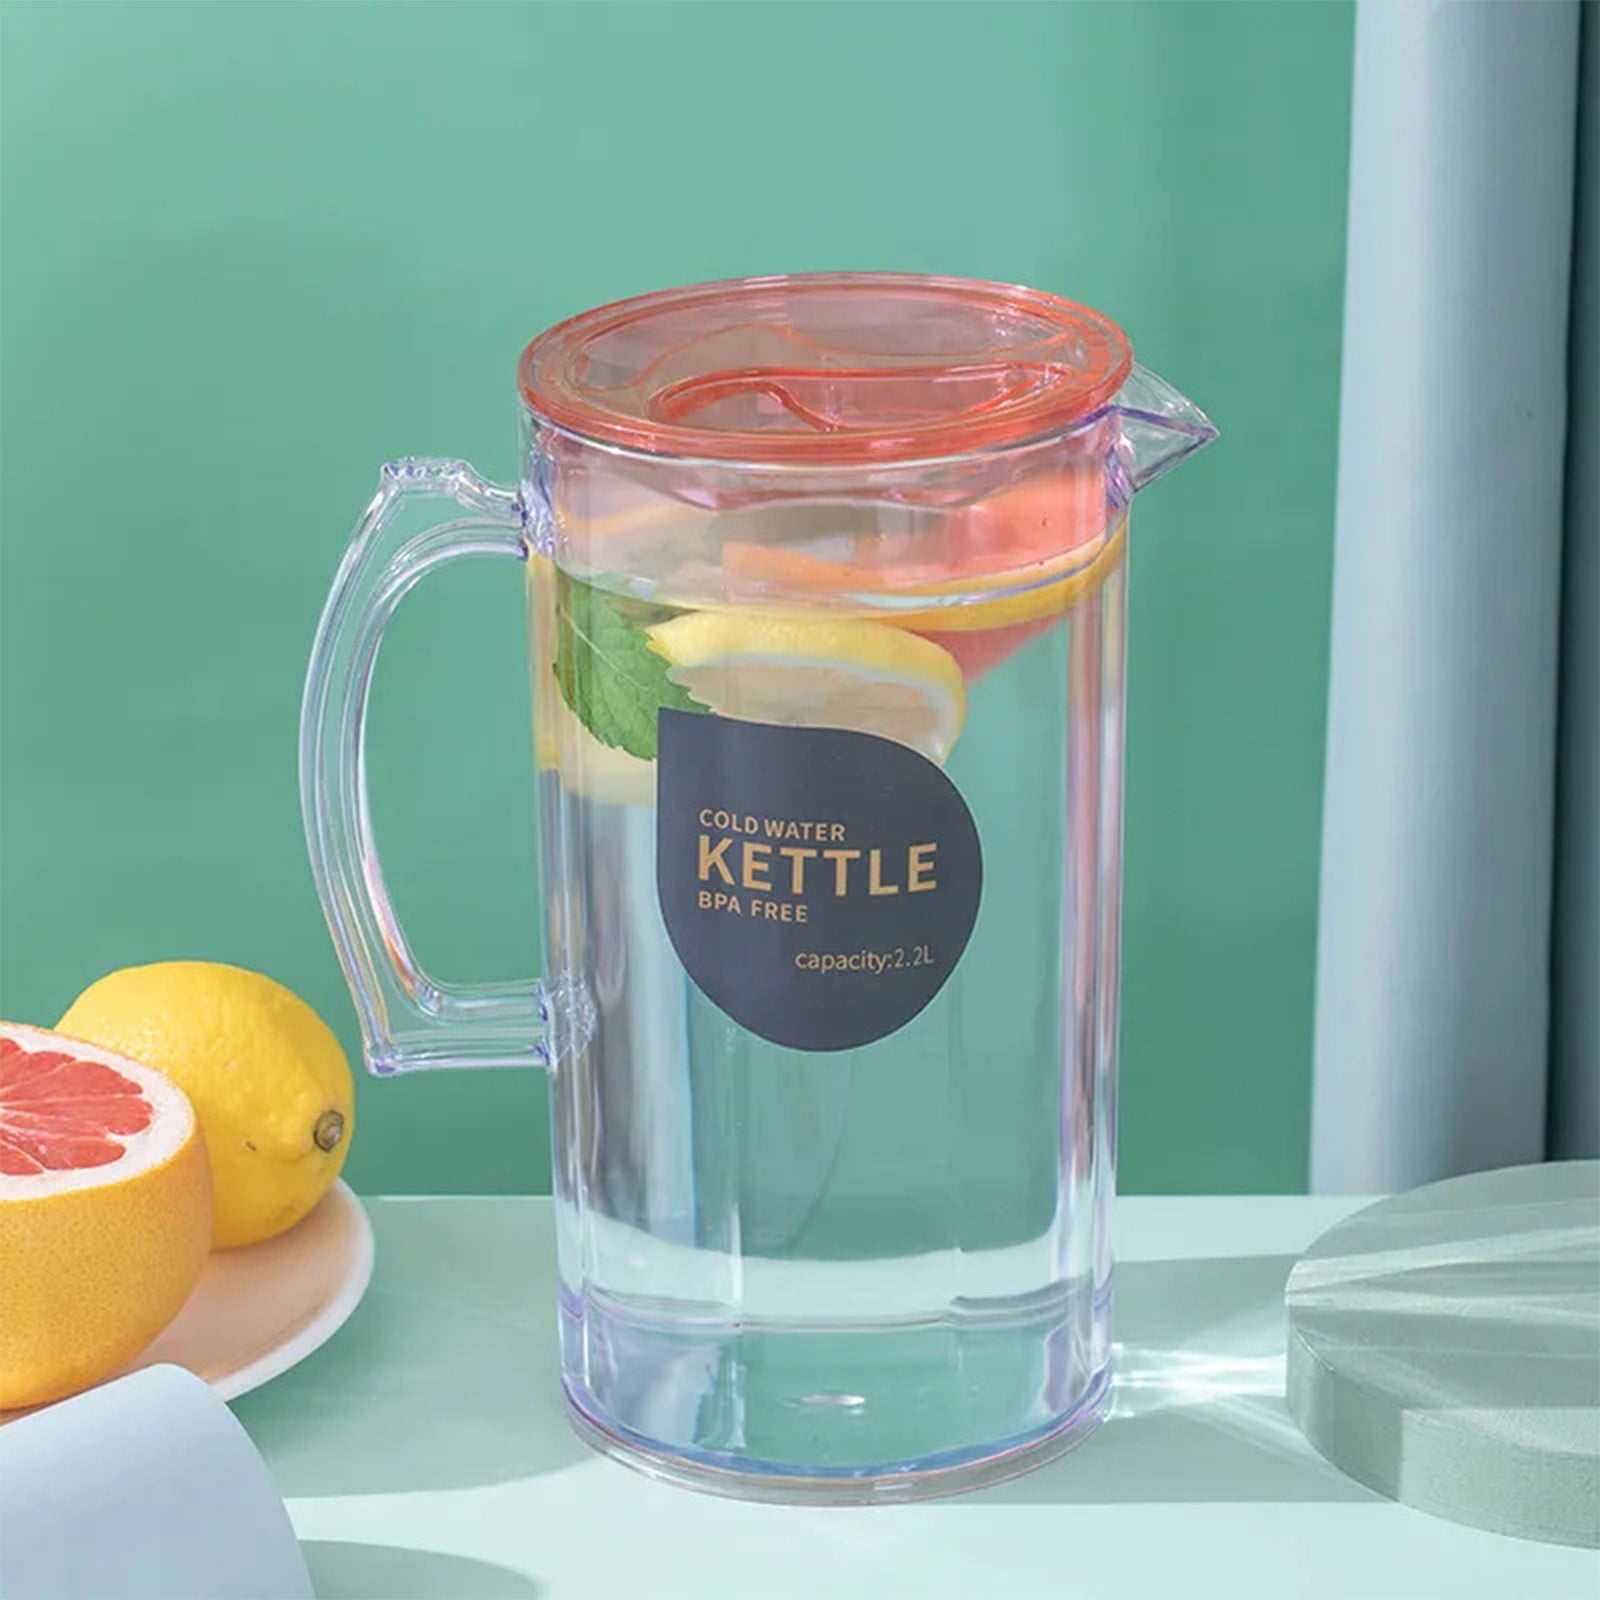 Rbckvxz 2.2L Cold Water Kettle Household Tea Kettle Water Bottle Refrigerator Cold Kettle Fruit Teapot Lemonade Drink Containers for Kitchen Home